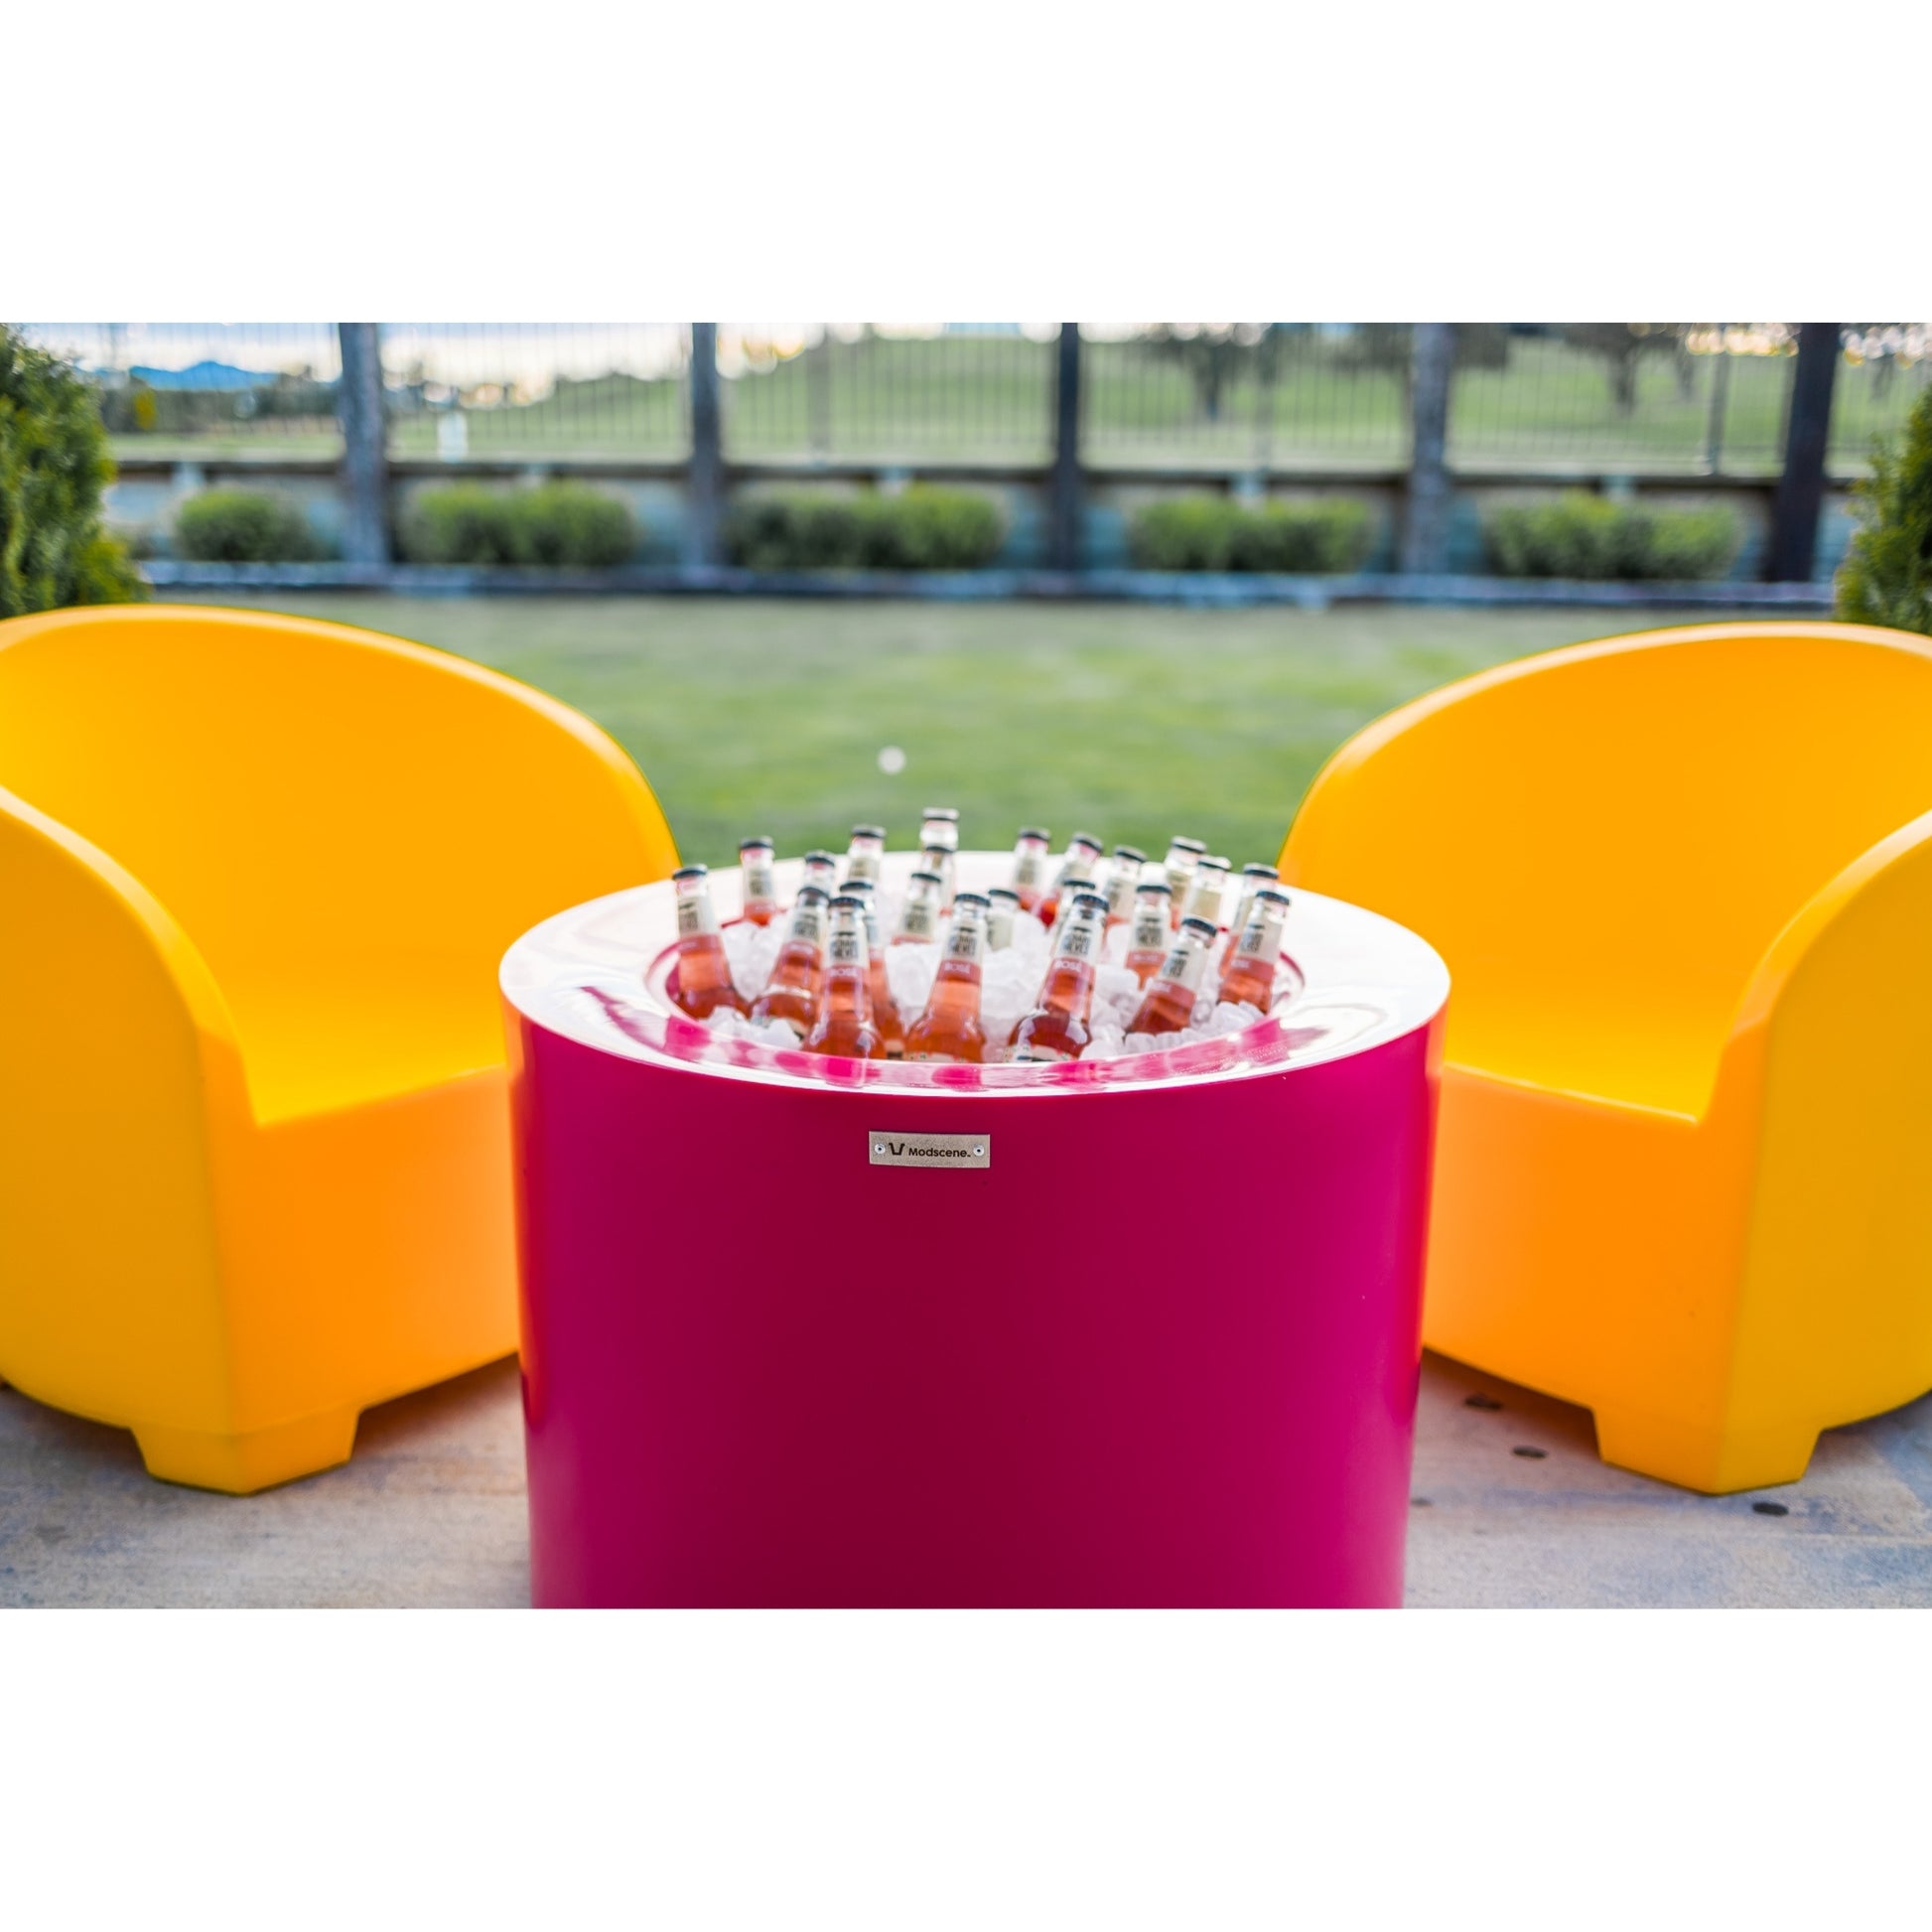 Bright pink and yellow Modscene outdoor furniture on a patio.